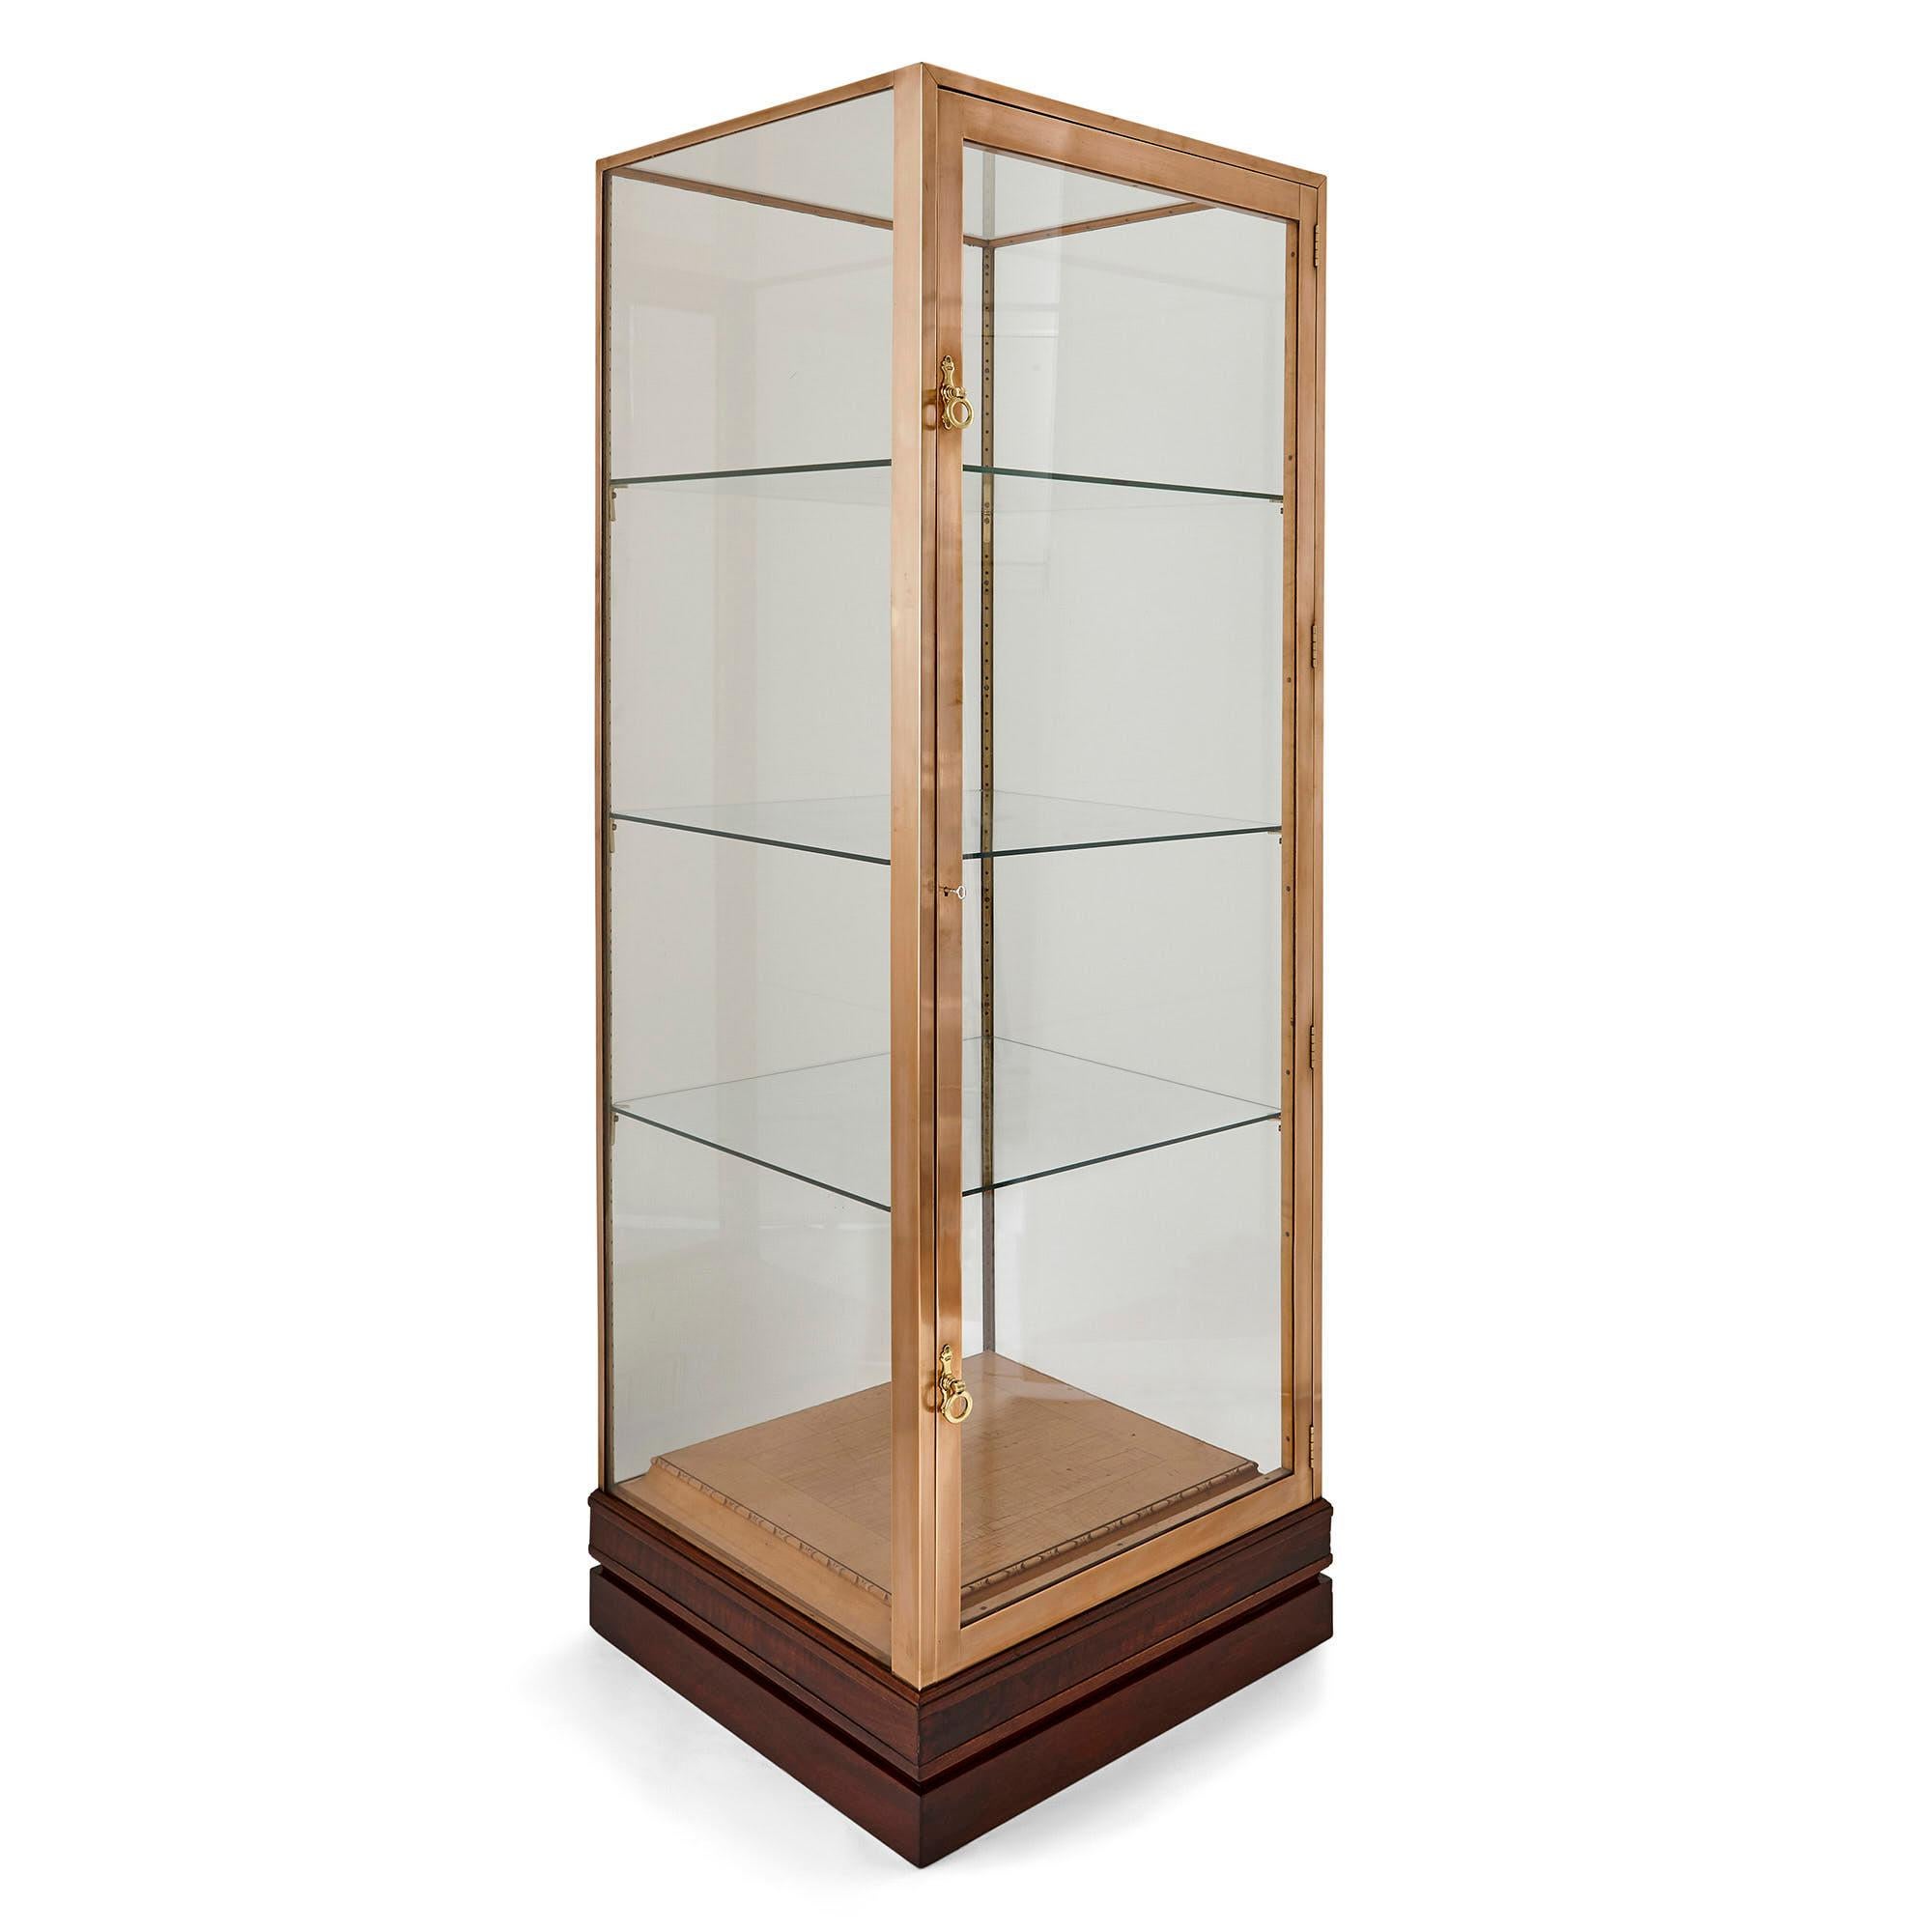 This pair of vitrines (display cabinets) are characterized by a restrained design typical of late period French Art Deco design. The vitrines sit on dark wooden bases. Wood is found again, though of a lighter colour, on the bottom of the interior,